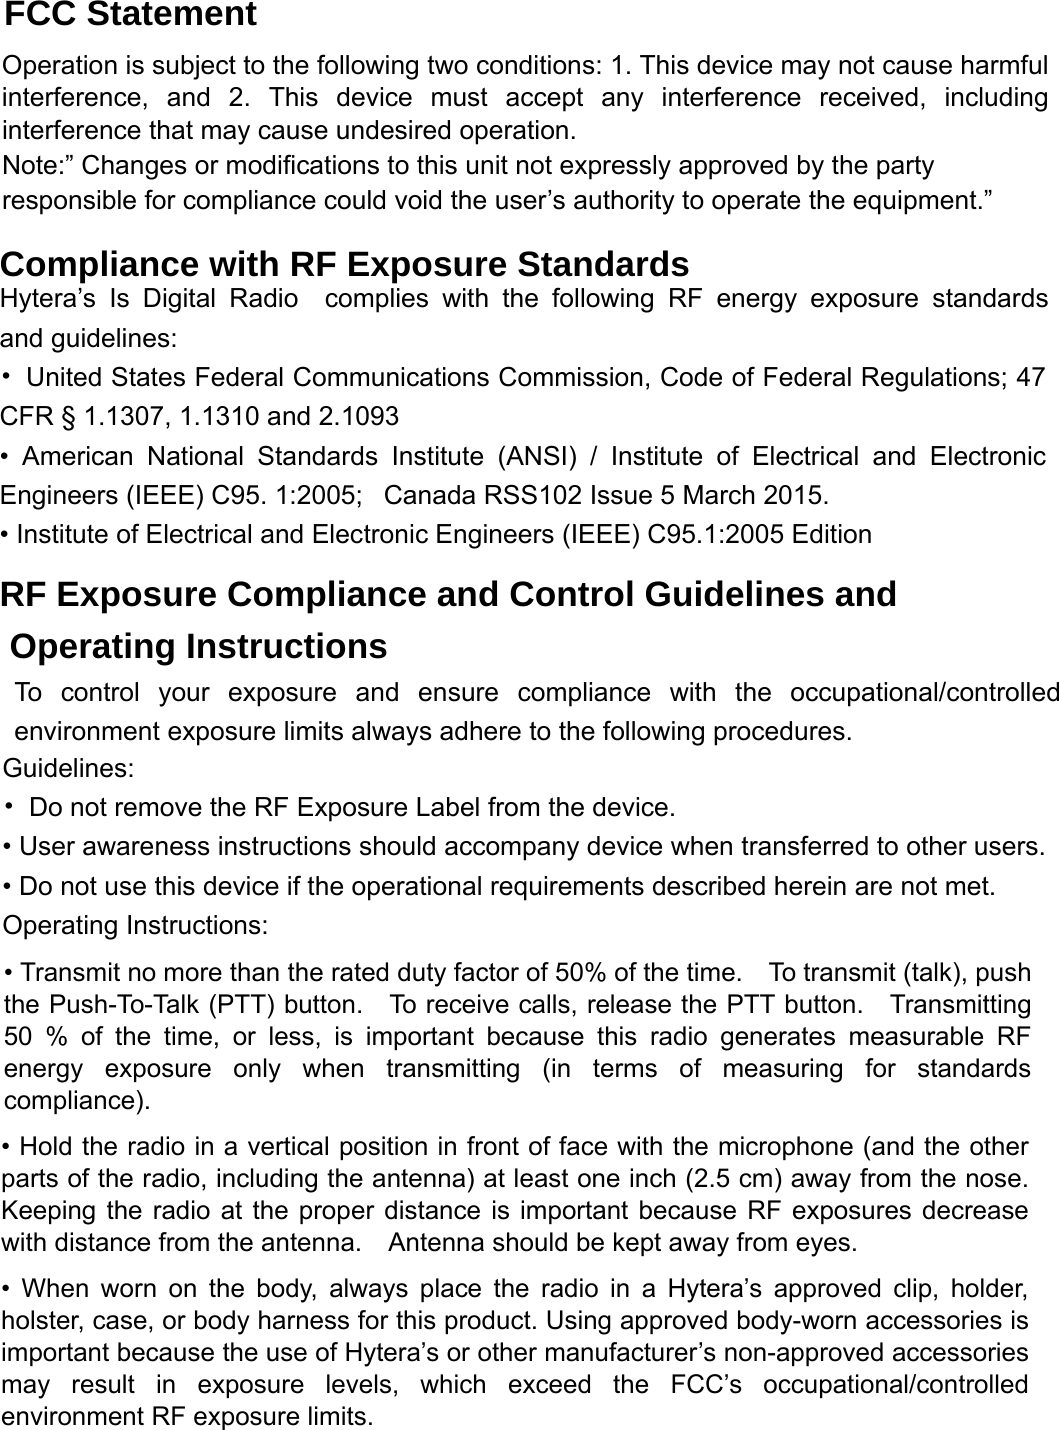 and guidelines: complies with the following RF energy exposure standardsFCC Statement Operation is subject to the following two conditions: 1. This device may not cause harmful interference, and 2. This device must accept any interference received, including interference that may cause undesired operation.   Note:” Changes or modifications to this unit not expressly approved by the party responsible for compliance could void the user’s authority to operate the equipment.” Compliance with RF Exposure Standards Hytera’s Is Digital Radio •  United States Federal Communications Commission, Code of Federal Regulations; 47 CFR § 1.1307, 1.1310 and 2.1093 • American National Standards Institute (ANSI) / Institute of Electrical and Electronic Engineers (IEEE) C95. 1:2005;   Canada RSS102 Issue 5 March 2015.• Institute of Electrical and Electronic Engineers (IEEE) C95.1:2005 Edition RF Exposure Compliance and Control Guidelines and Operating Instructions To control your exposure and ensure compliance with the occupational/controlled environment exposure limits always adhere to the following procedures. Guidelines: •  Do not remove the RF Exposure Label from the device.   • User awareness instructions should accompany device when transferred to other users.   • Do not use this device if the operational requirements described herein are not met. Operating Instructions:   • Transmit no more than the rated duty factor of 50% of the time.    To transmit (talk), push the Push-To-Talk (PTT) button.    To receive calls, release the PTT button.    Transmitting 50 % of the time, or less, is important because this radio generates measurable RF energy exposure only when transmitting (in terms of measuring for standards compliance). • Hold the radio in a vertical position in front of face with the microphone (and the other parts of the radio, including the antenna) at least one inch (2.5 cm) away from the nose.   Keeping the radio at the proper distance is important because RF exposures decrease with distance from the antenna.    Antenna should be kept away from eyes.   • When worn on the body, always place the radio in a Hytera’s approved clip, holder, holster, case, or body harness for this product. Using approved body-worn accessories is important because the use of Hytera’s or other manufacturer’s non-approved accessories may result in exposure levels, which exceed the FCC’s occupational/controlled environment RF exposure limits. 